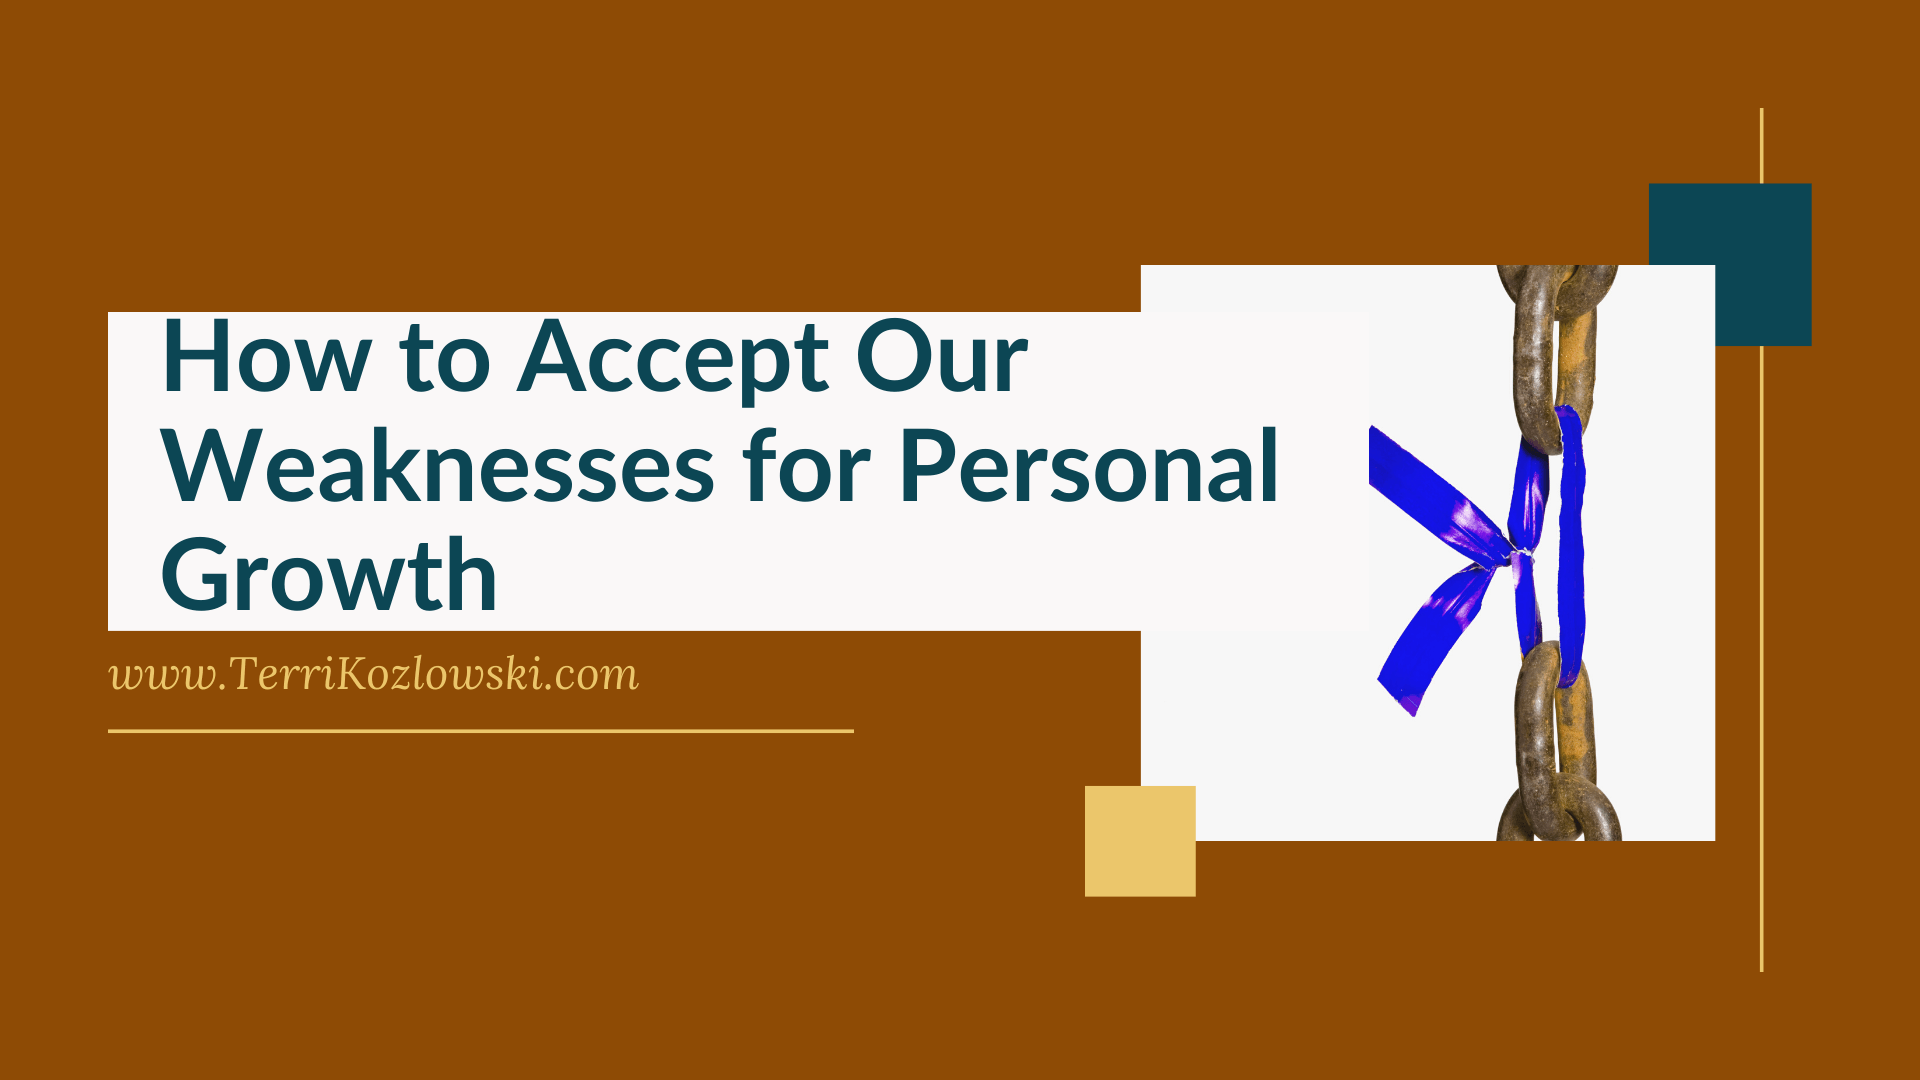 How to Accept Our Weaknesses for Personal Growth